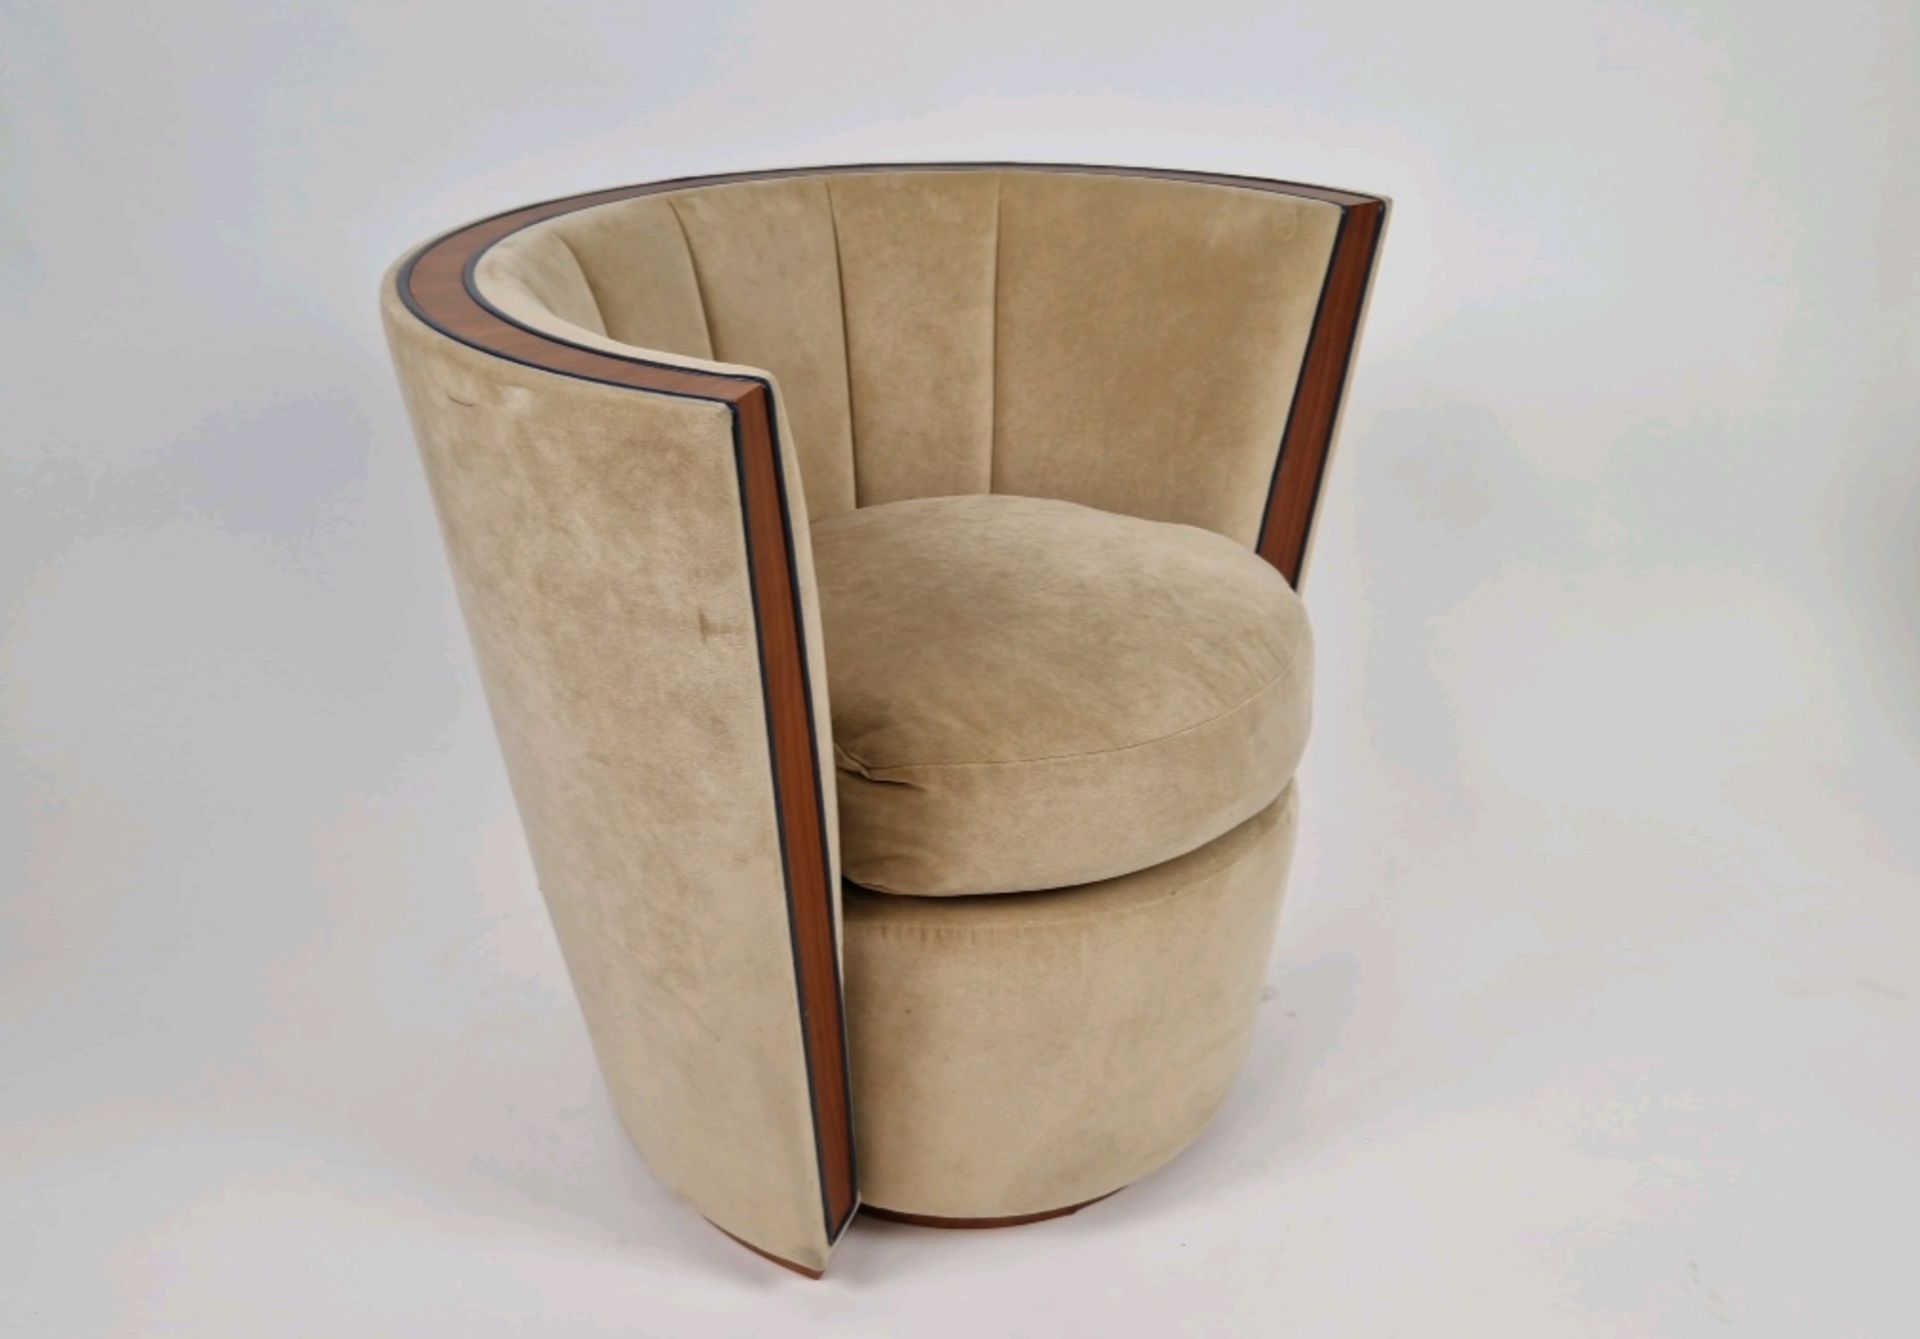 Bespoke Deco Tub Chair Made for Claridge's by David Linley - Image 3 of 9